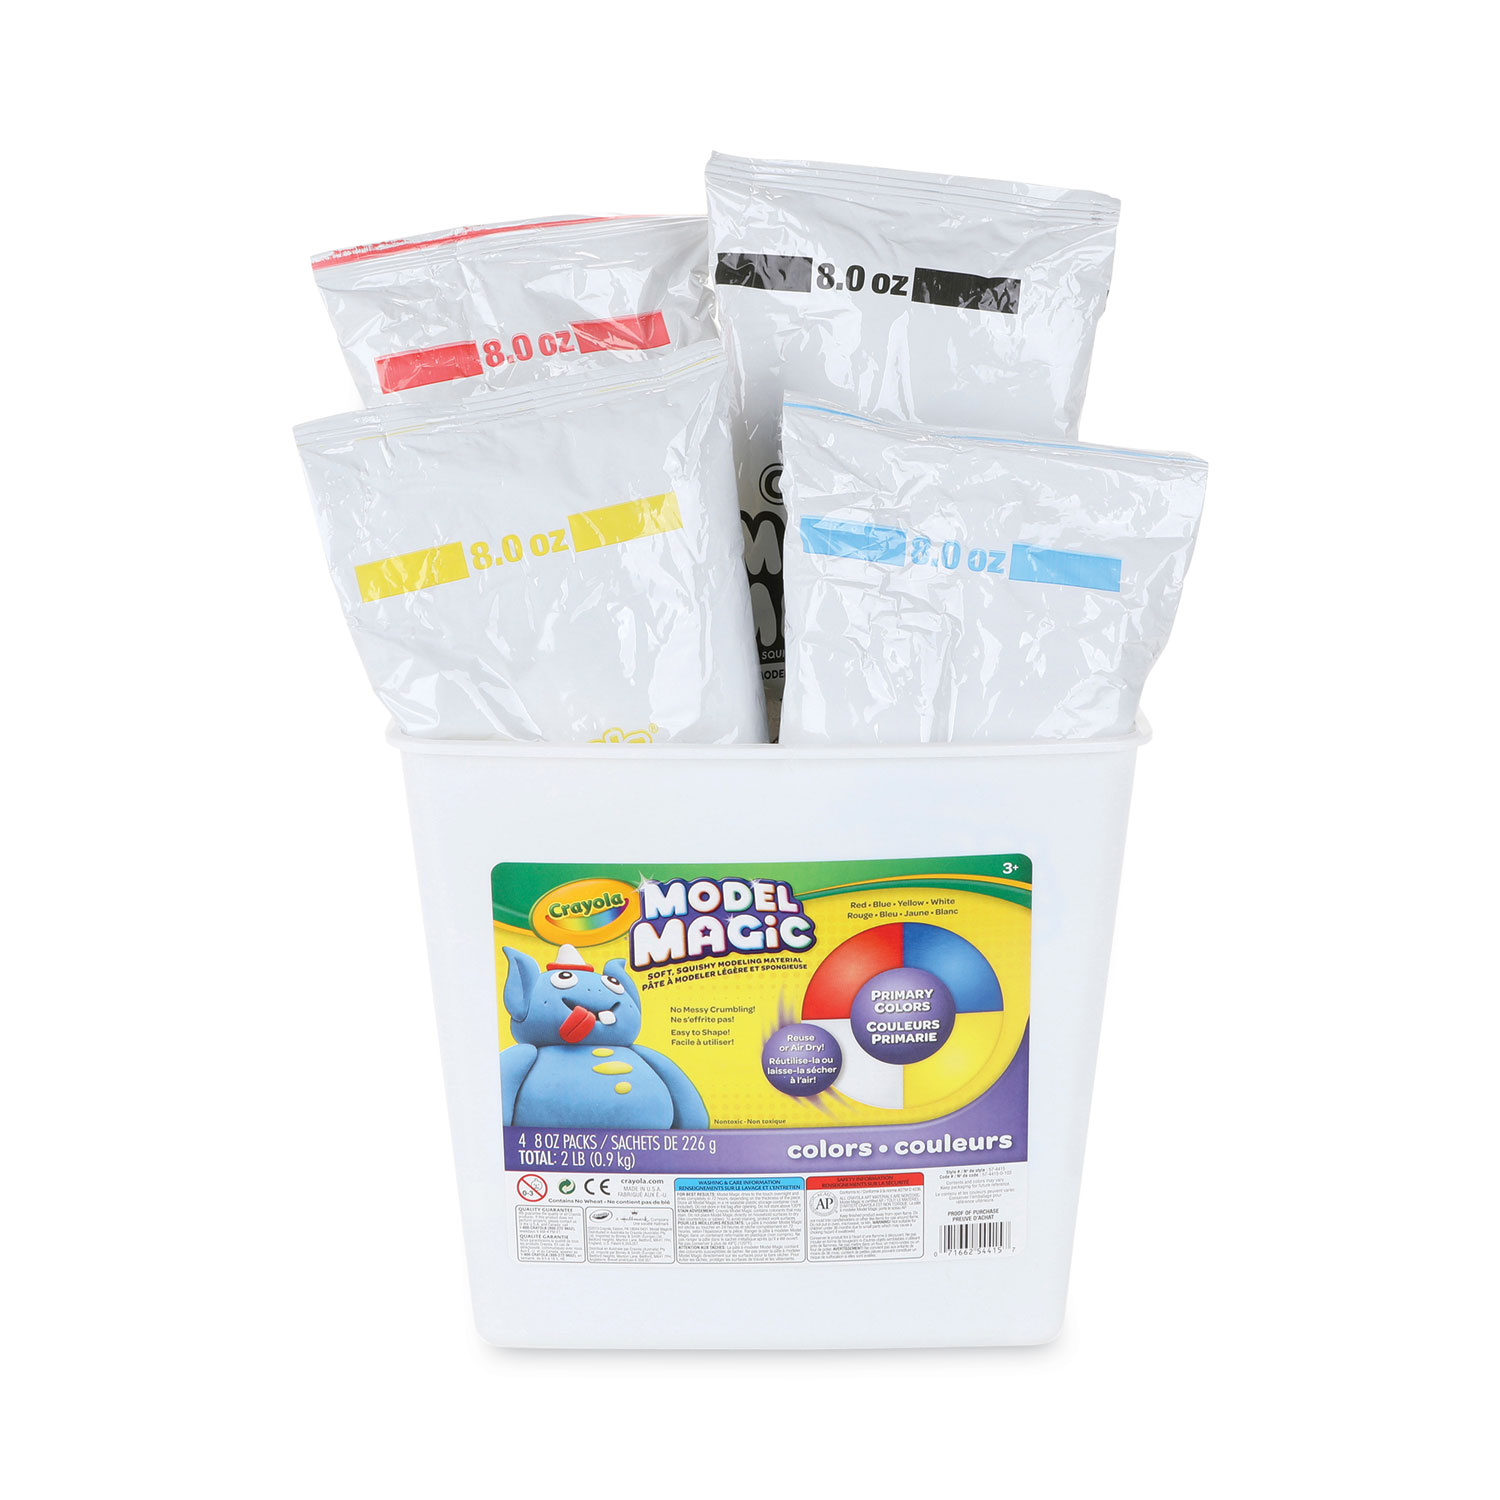 Model Magic Modeling Compound, 8 oz Packs, 4 Packs, Blue, Red, White,  Yellow, 2 lbs - BOSS Office and Computer Products